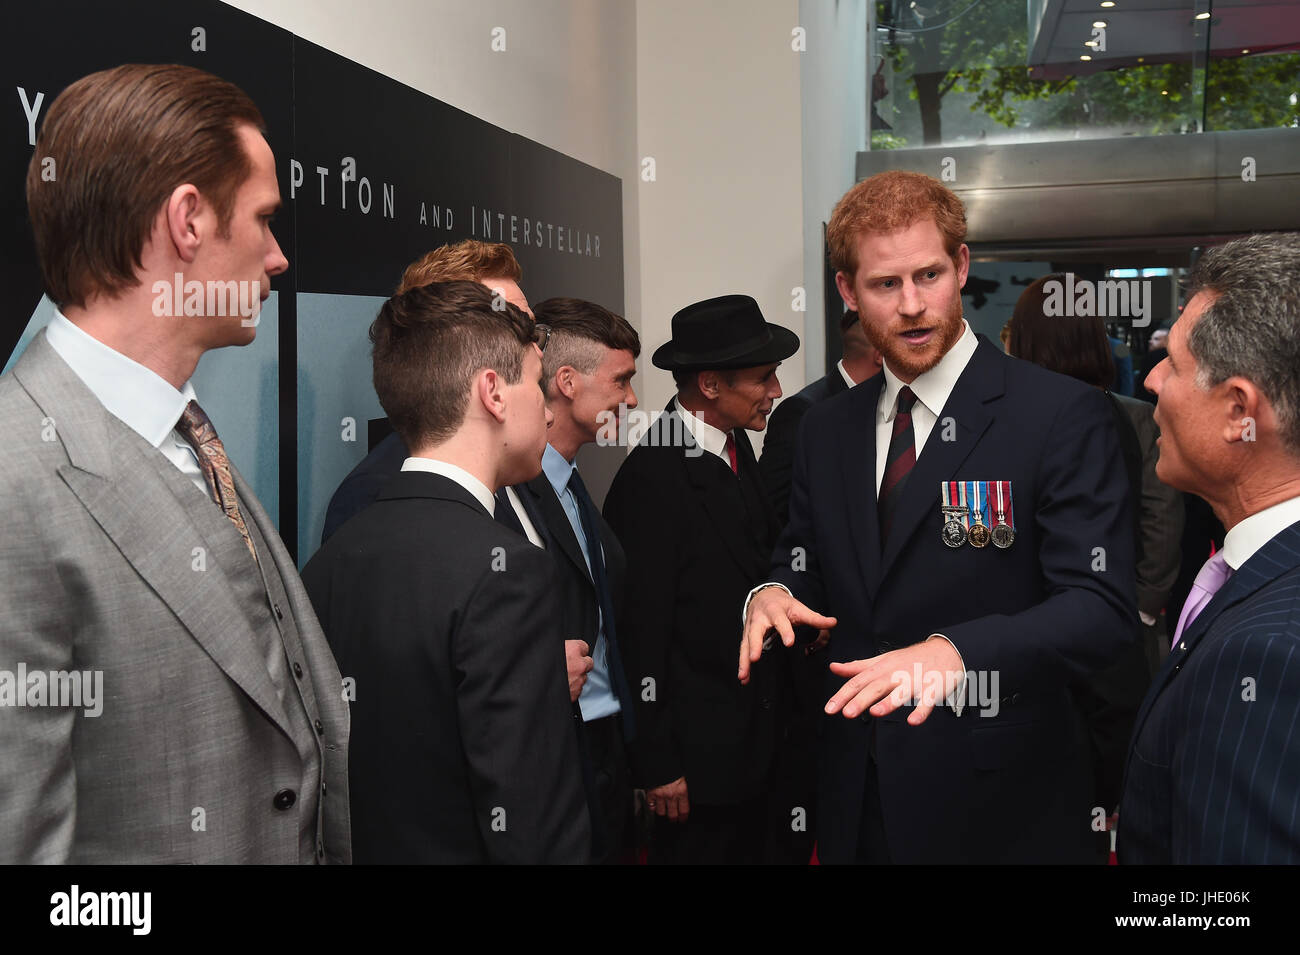 Prince Harry with James D'Arcy, Barry Keoghan, Sir Kenneth Branagh, Cillian Murphy and Mark Rylance as he attends the world premiere of Christopher Nolan's epic Second World War movie Dunkirk at the Odeon Leicester Square in London. Stock Photo